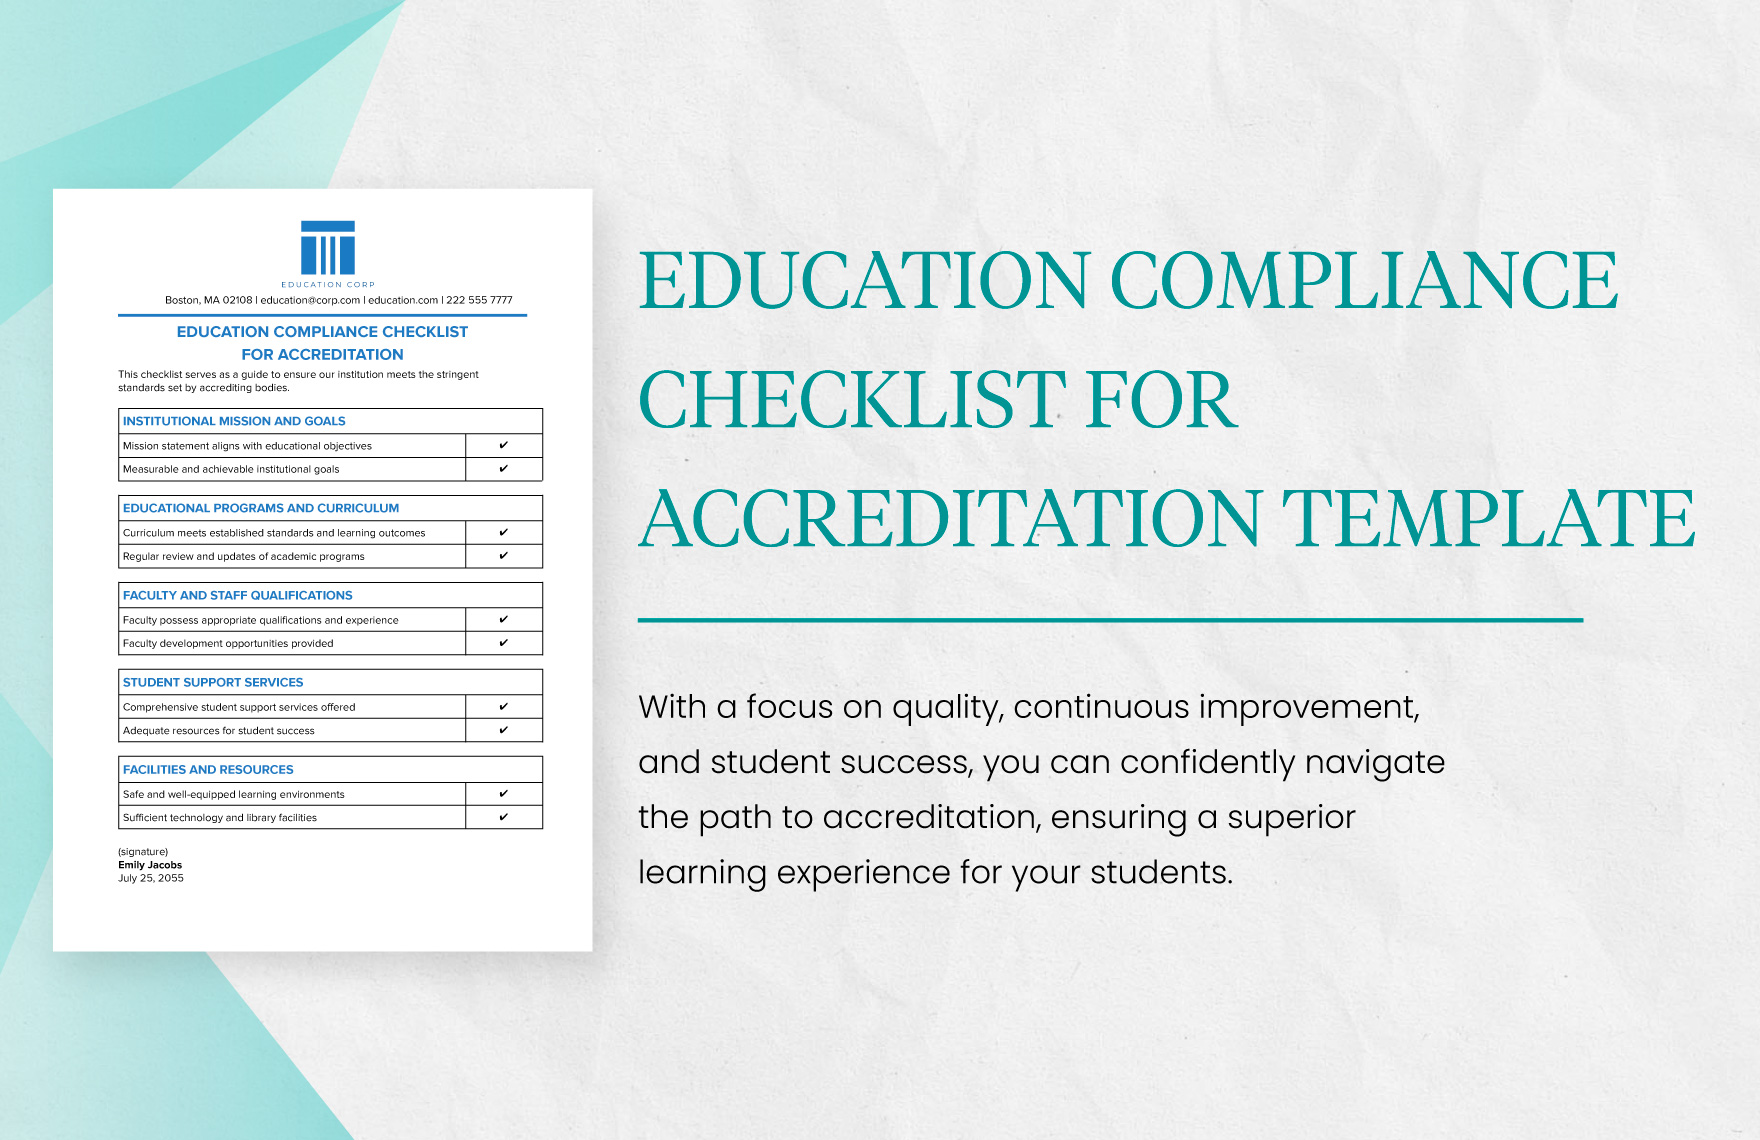 Education Compliance Checklist for Accreditation Template in Word, Google Docs, PDF